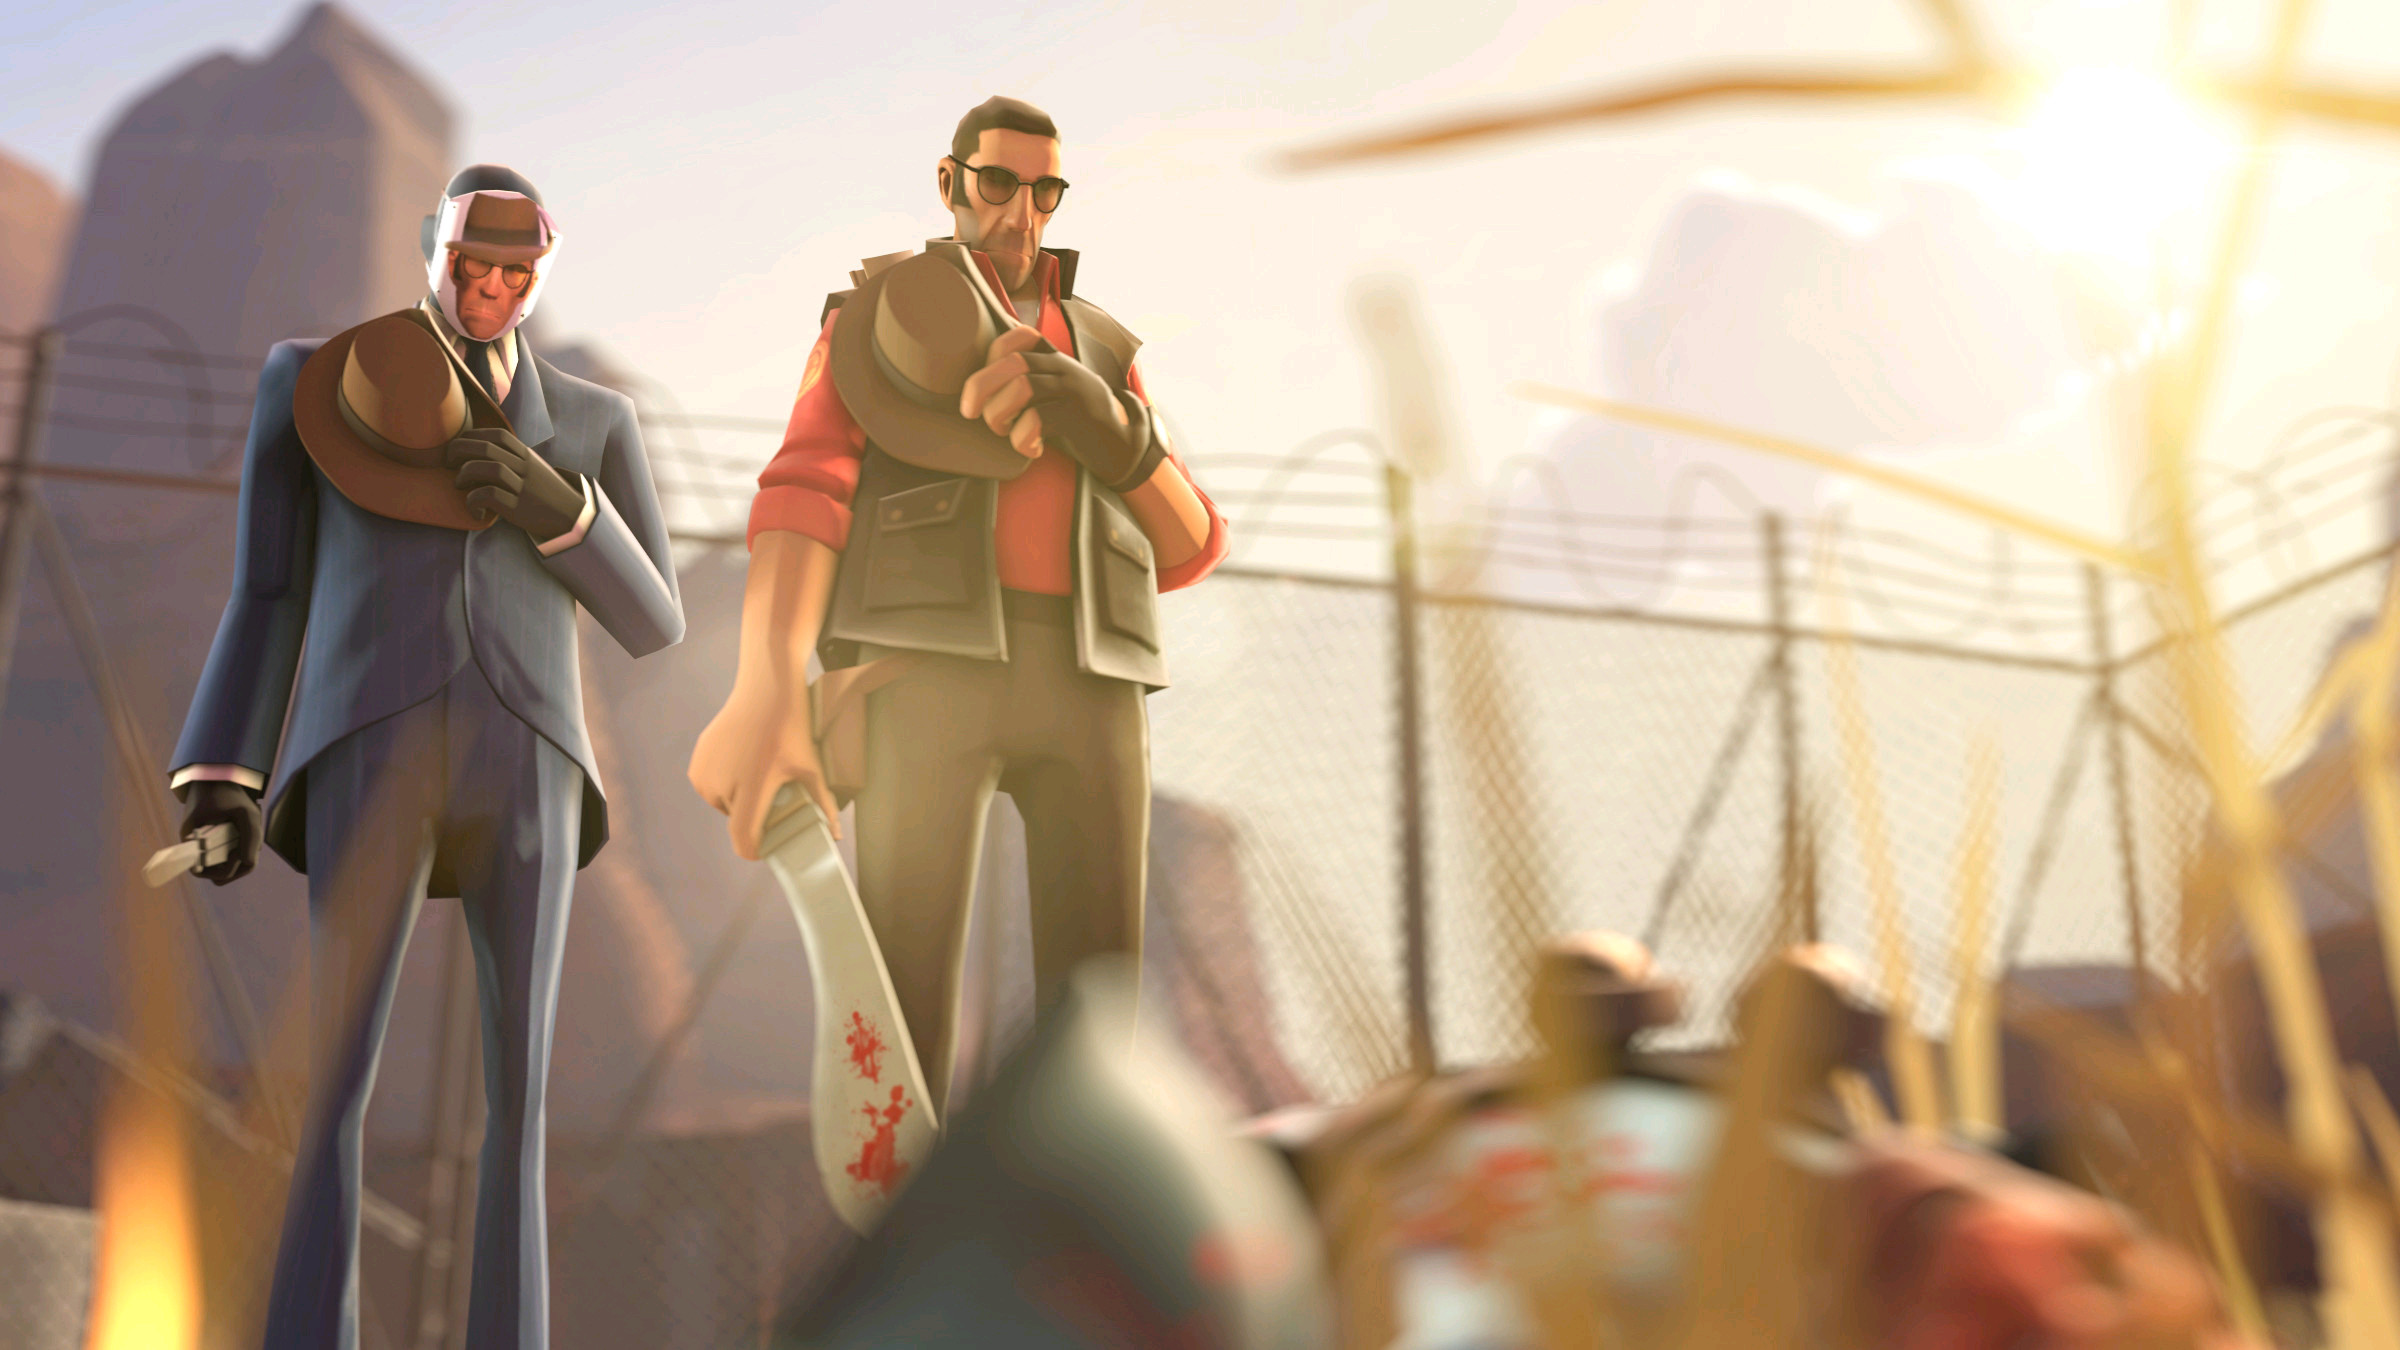 2400x1350 More tf2 Wallpapers? :3 (One attached is my current one.)